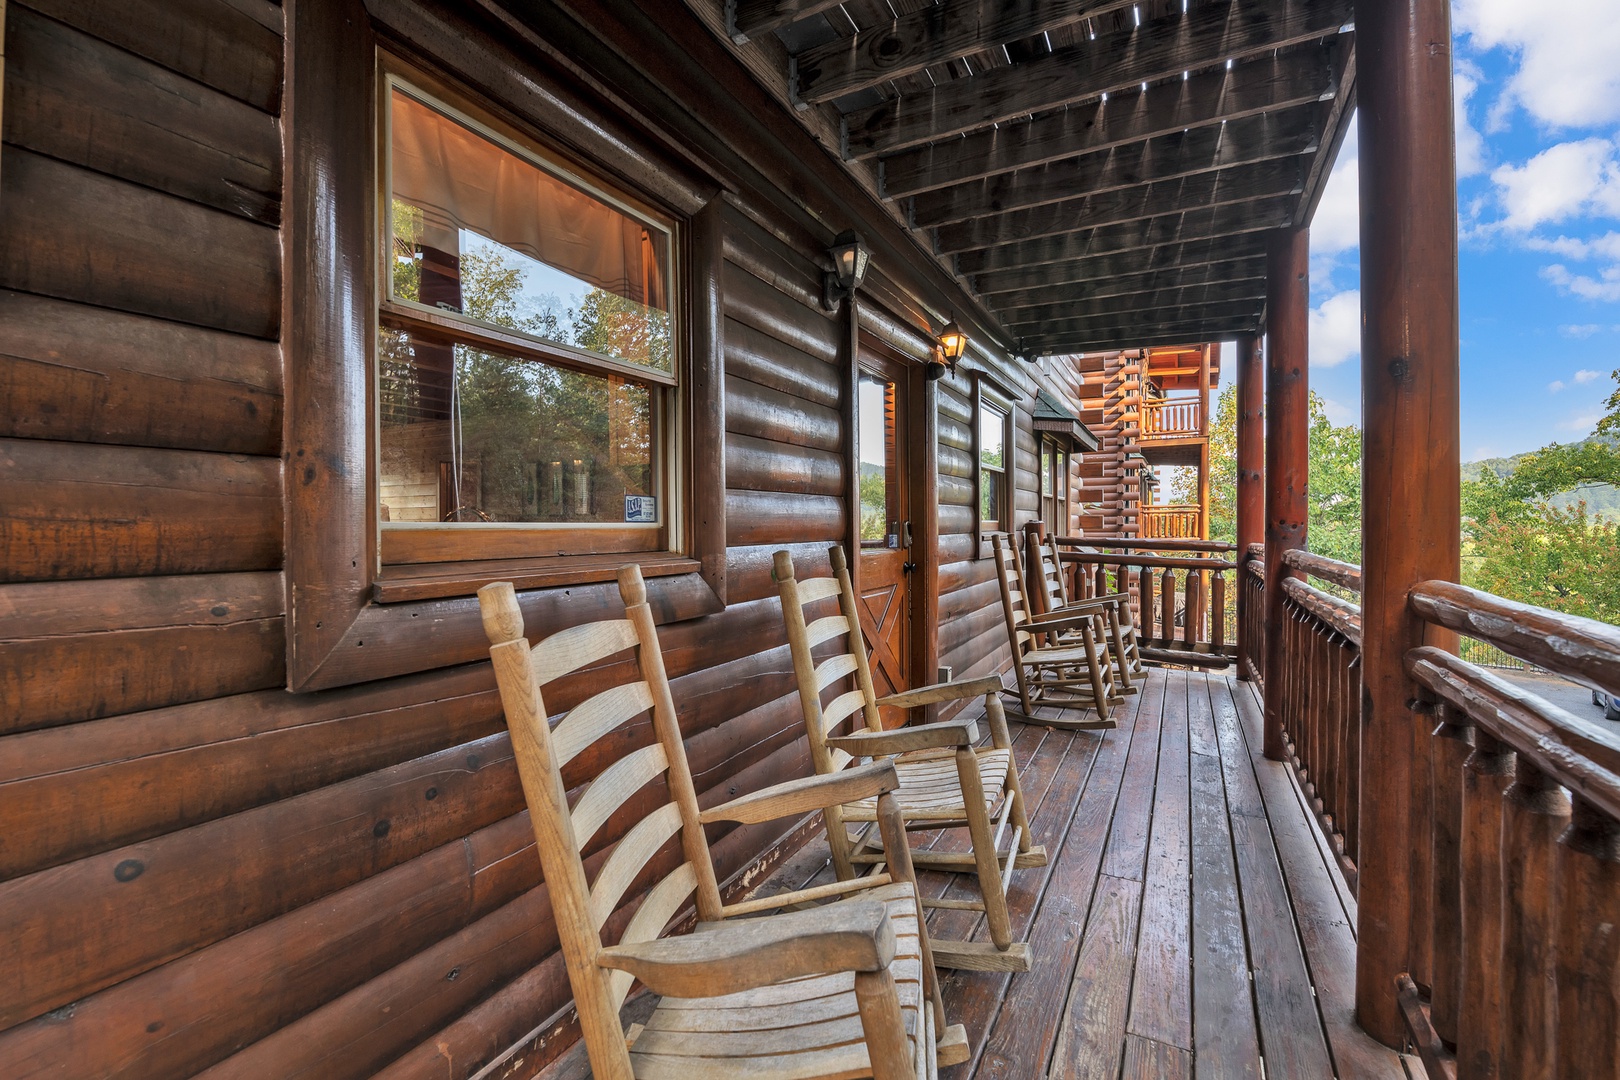 This cabin is equipped with keyless entry for guest convenience